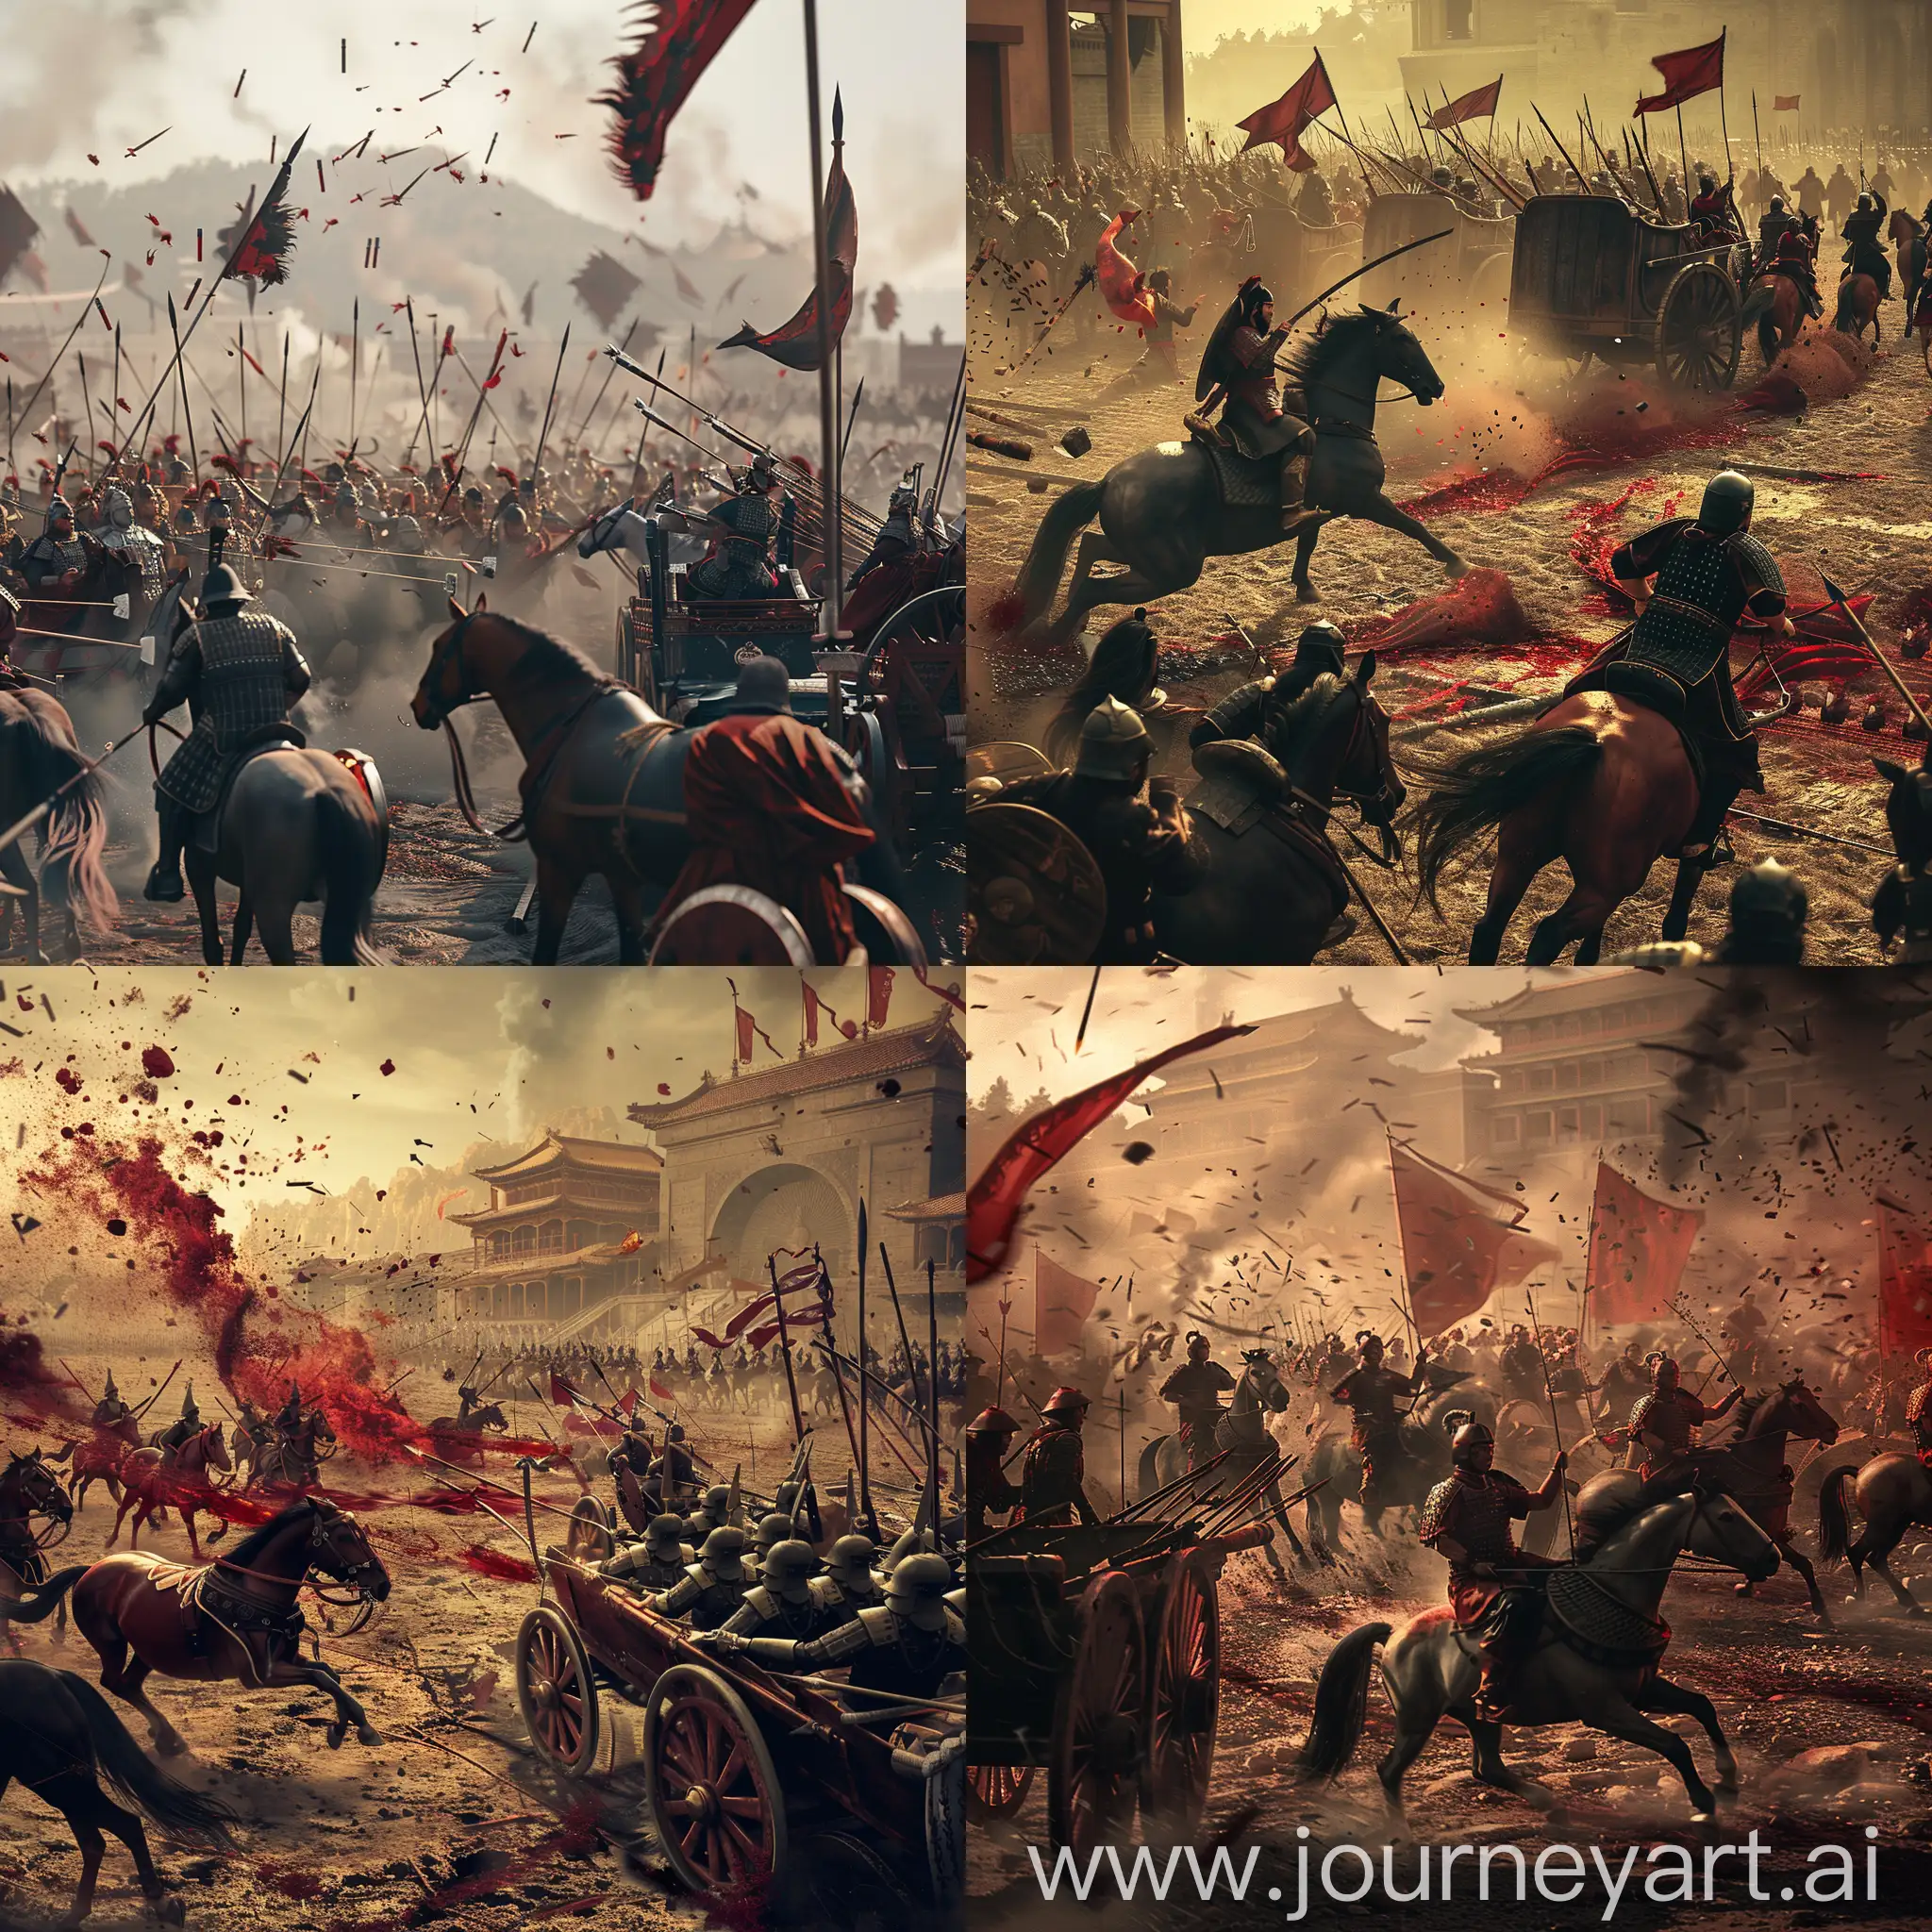 Bloody battle in ancient China, horses, chariots, spears, arrows, sad and gloomy background, extremely realistic, 8k high resolution.